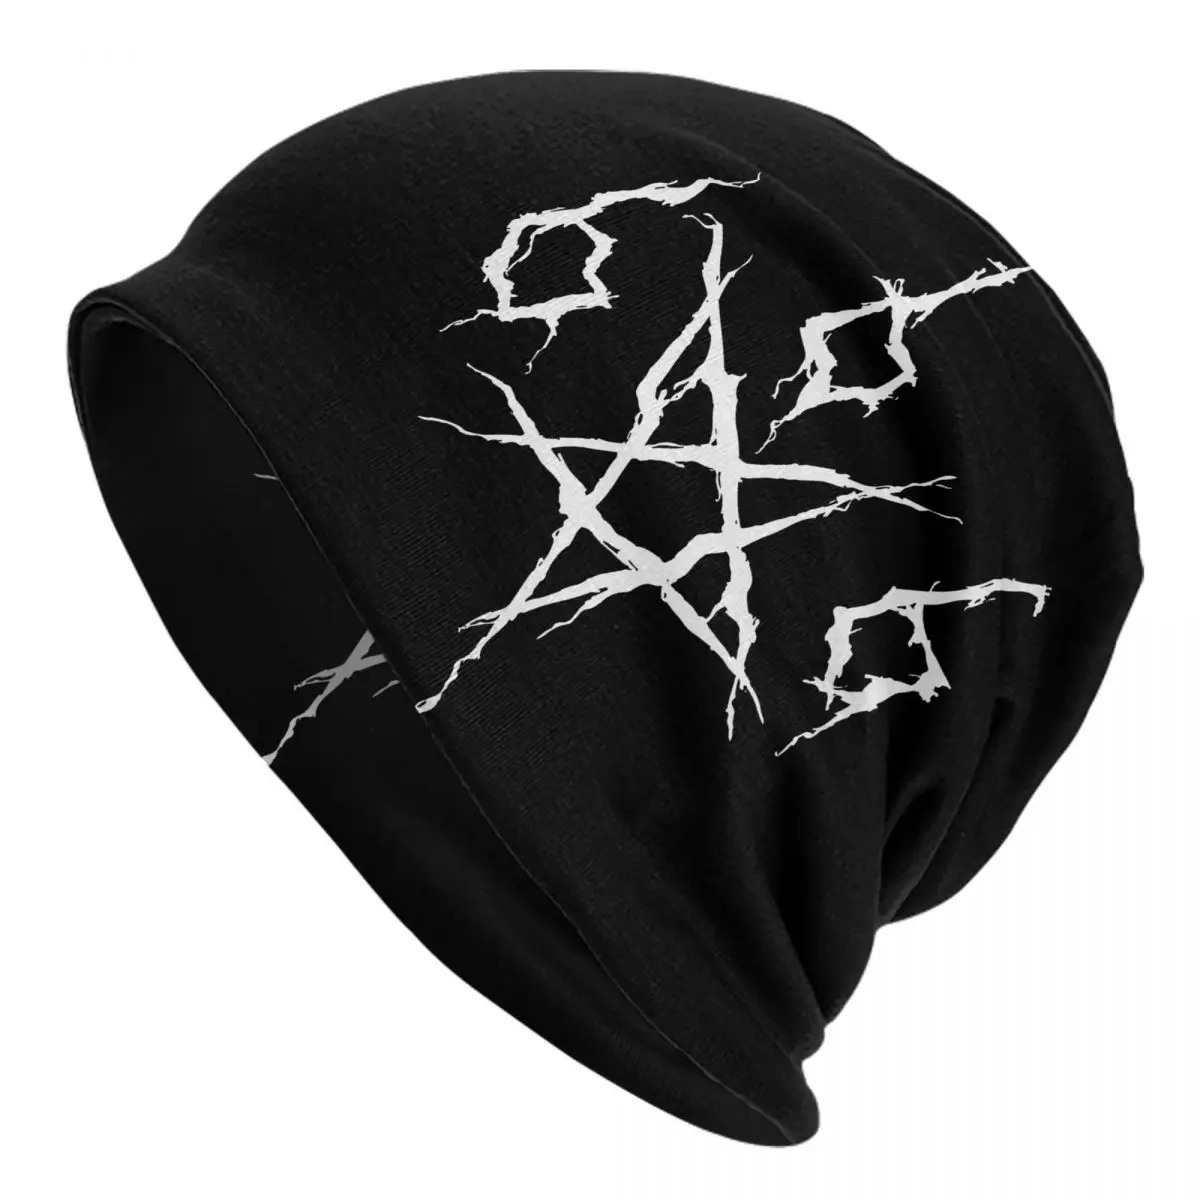 666 Adult Men's Women's Knit Hat Keep warm winter Funny knitted hat